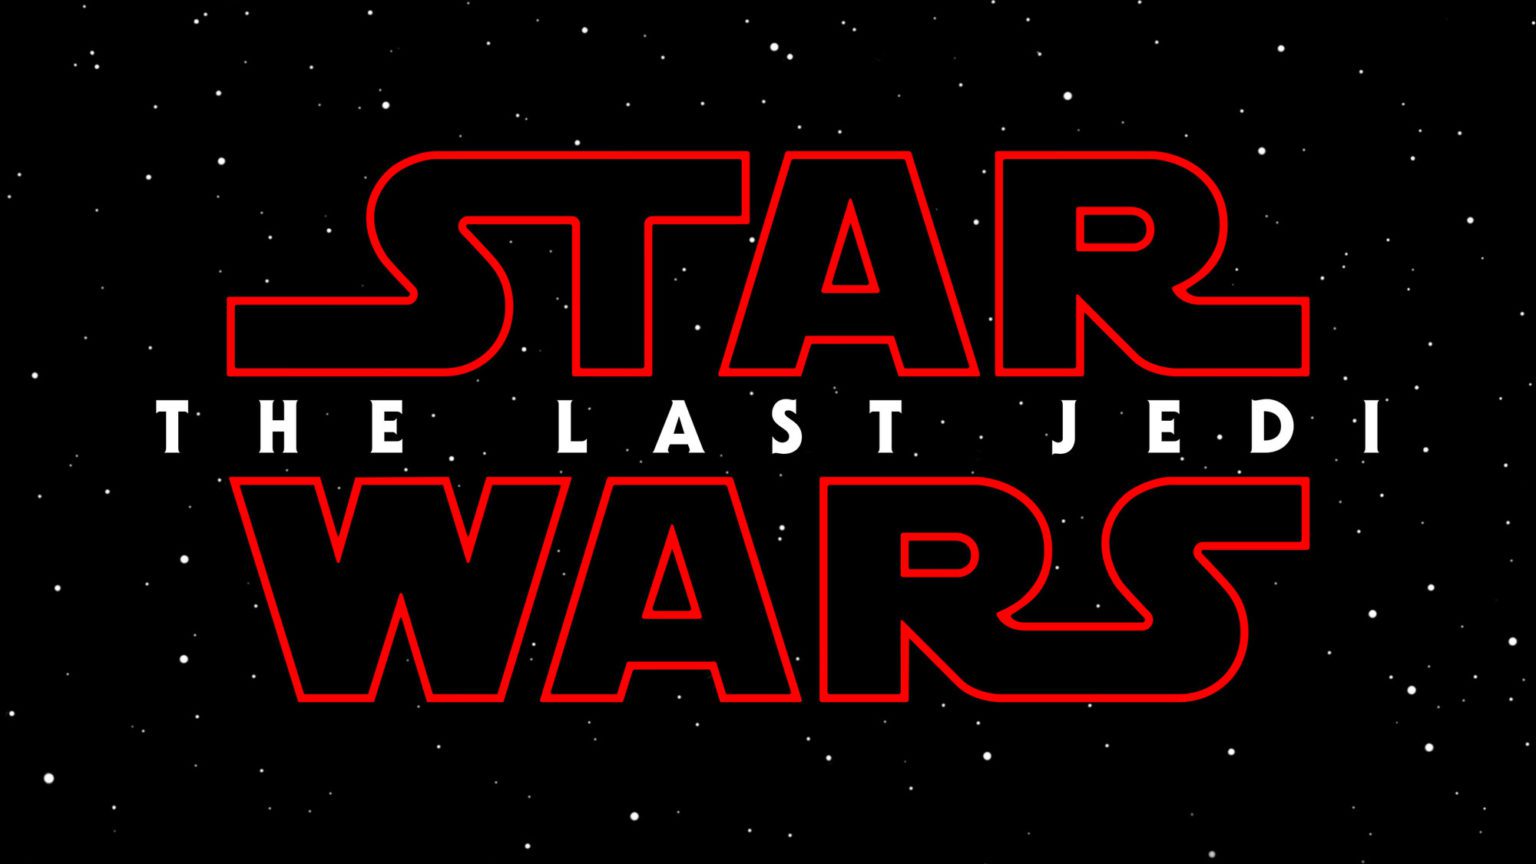 Episode 8 has an official name with ‘Star Wars: The Last Jedi’